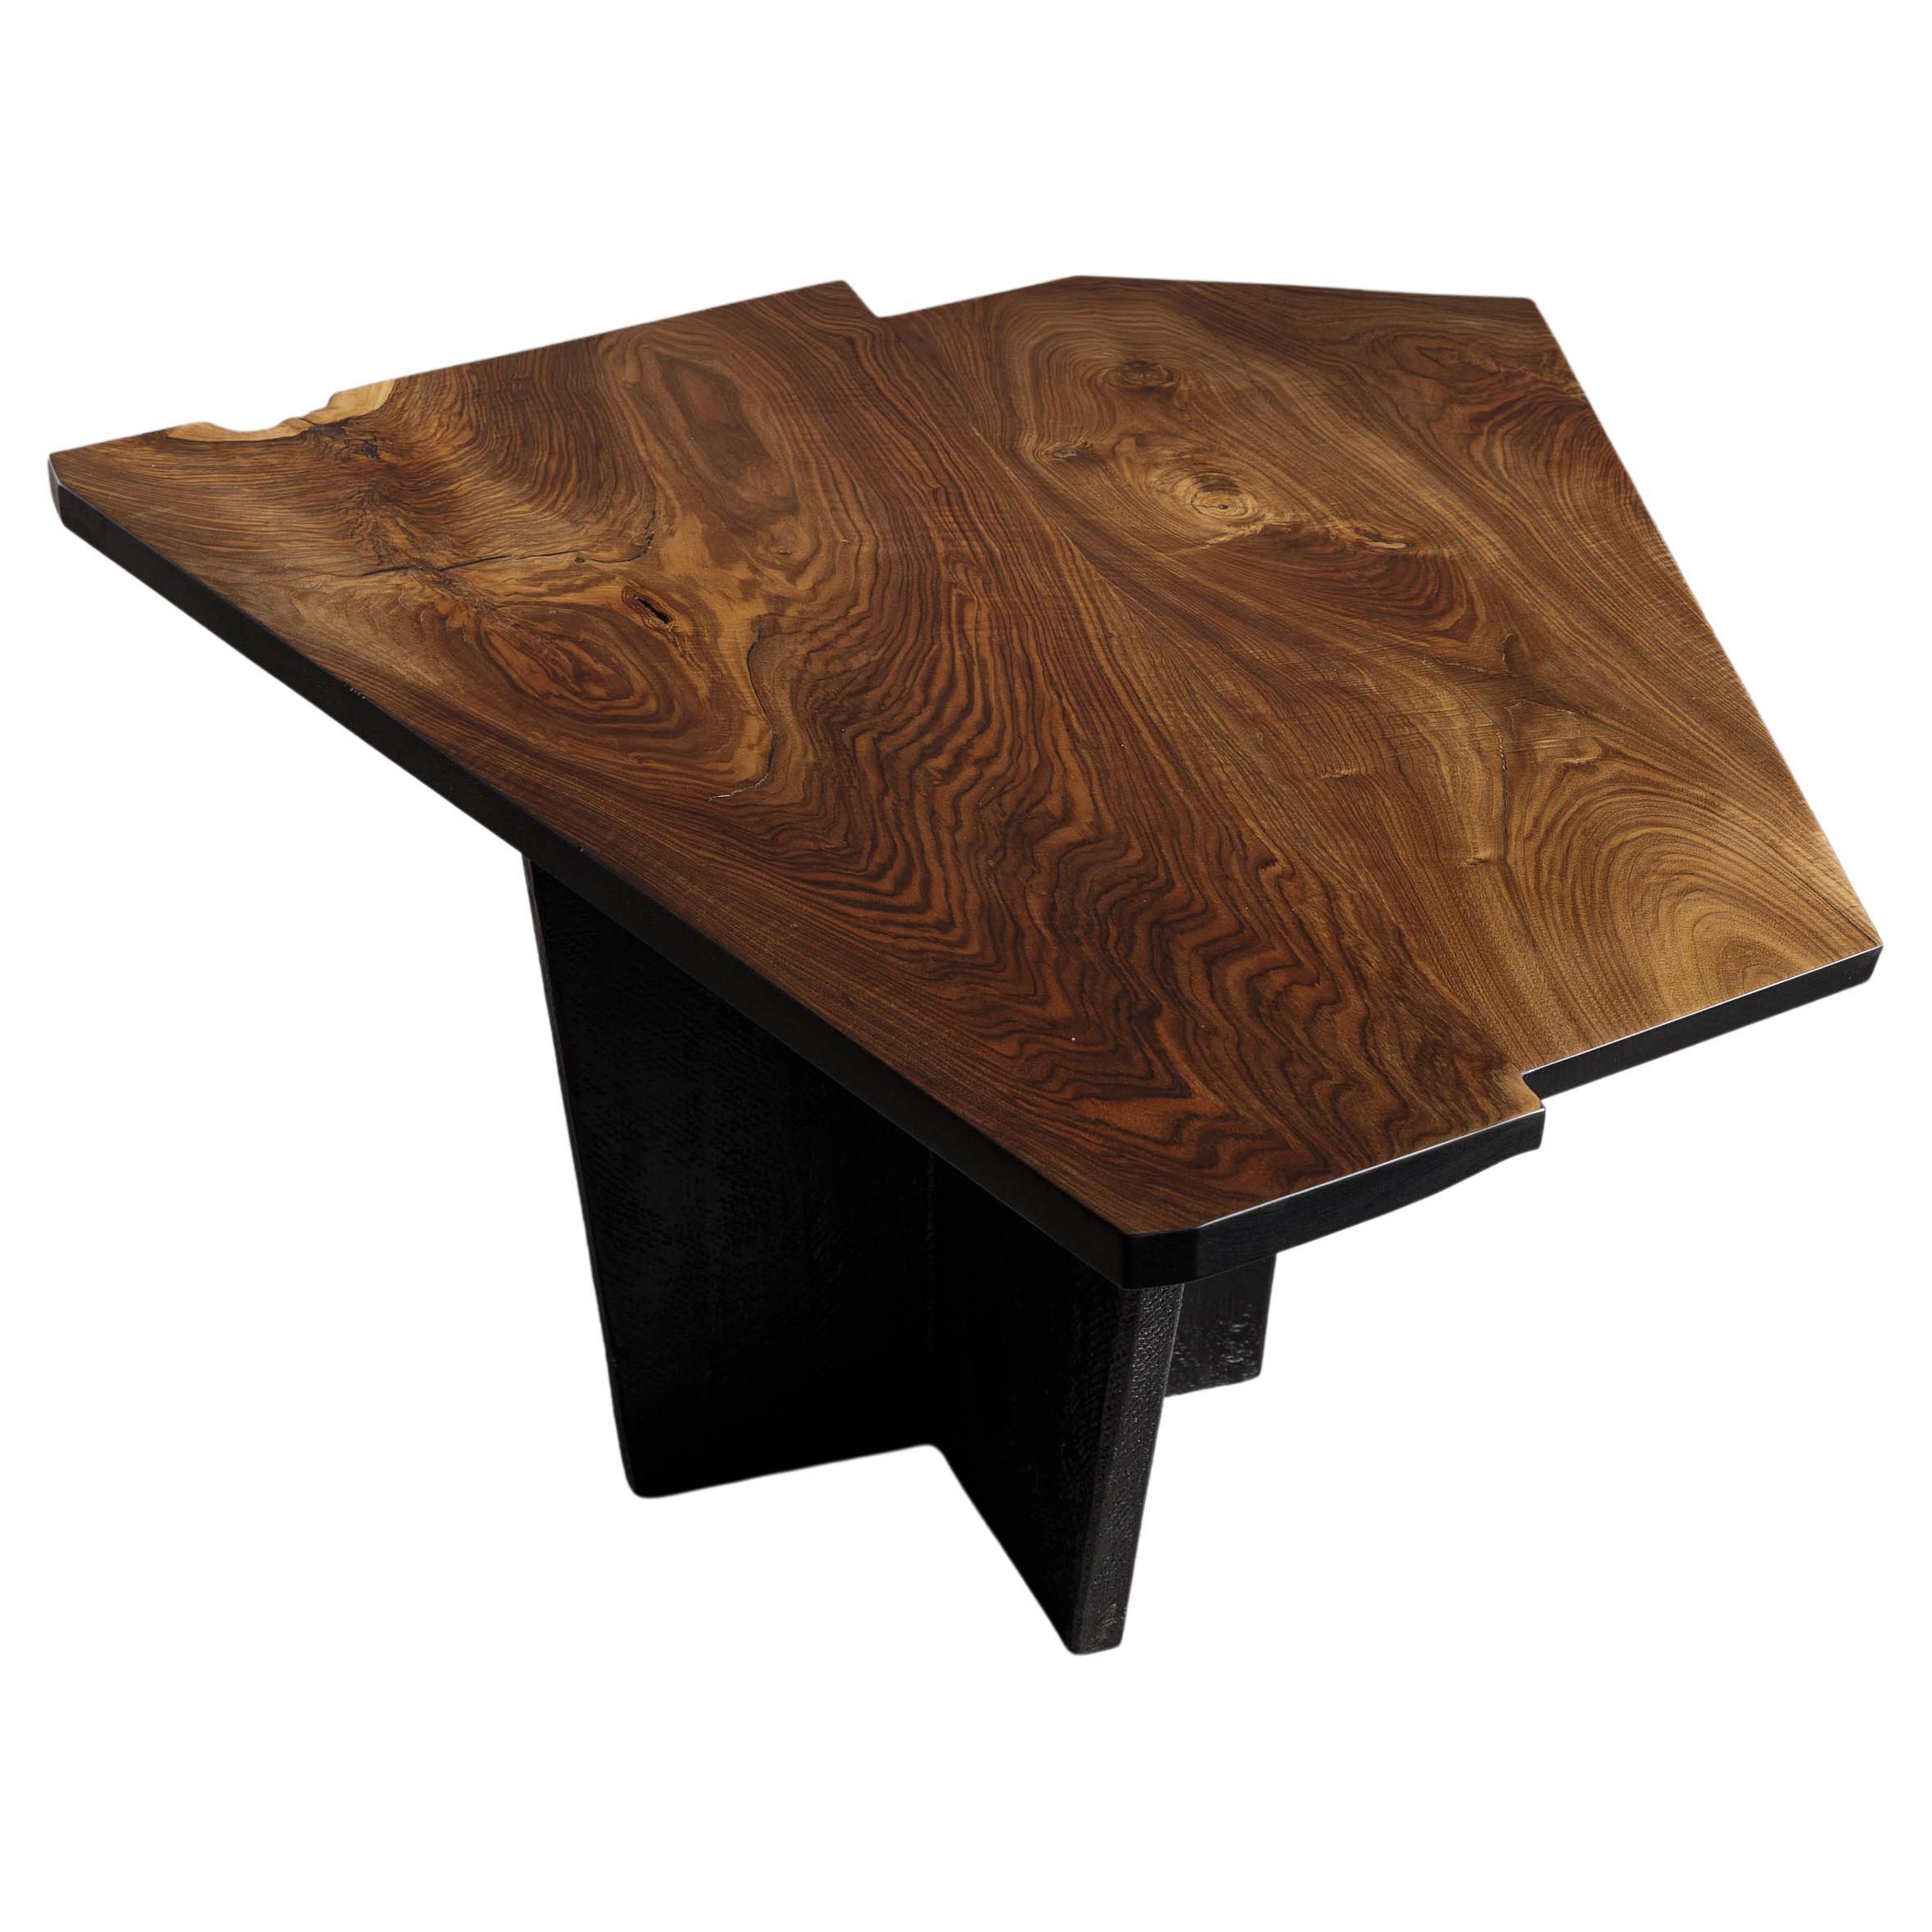 Eero Moss Small Walnut Dining Table, EM205 For Sale